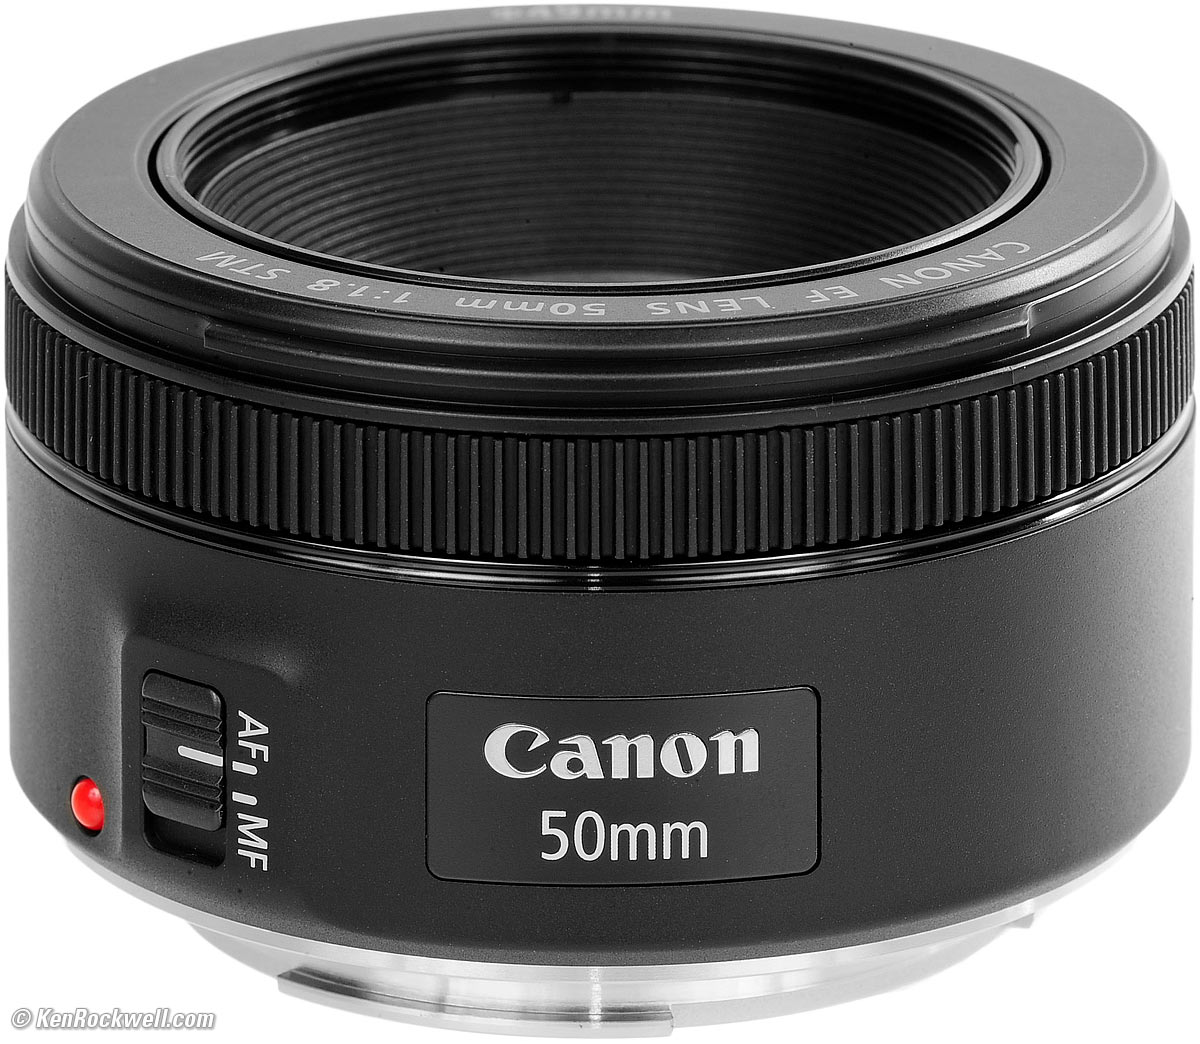 Ja Product Koning Lear Canon 50mm f/1.8 STM Review